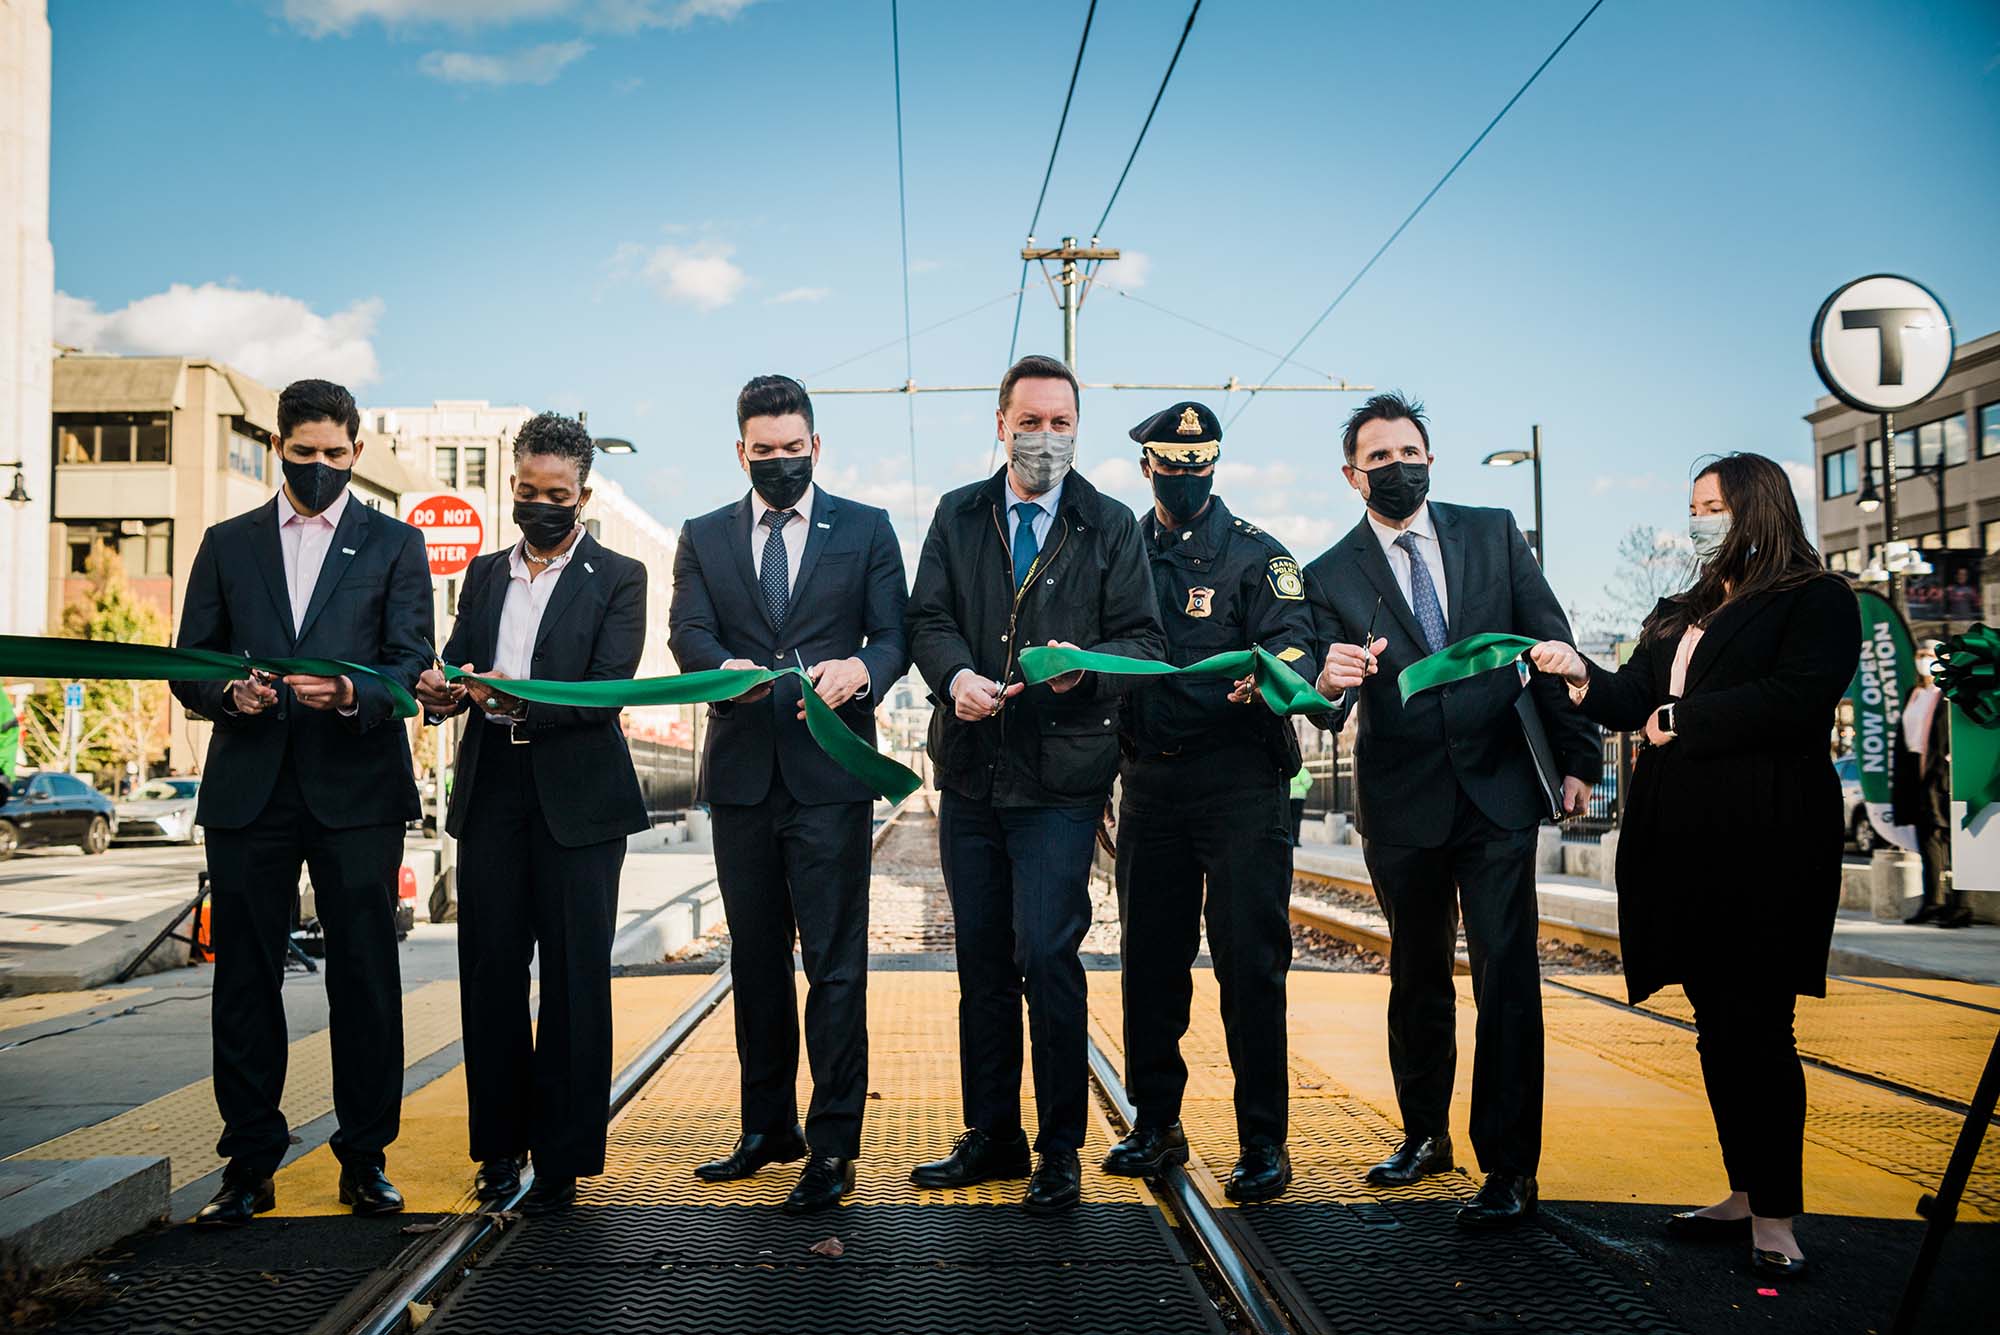 Photo of a group of MBTA officials dressed in dark suits and/or formal attire and wearing dark masks as they cut a green ribbon. They stand on the green line track and blue sky is seen behind them. From left to right: Andres Achury – GLT Senior Director Desiree Patrice – Deputy Chief, Angel Peña MBTA Chief Capital Transformation Steve Poftak – MBTA General Manager Kenneth Green – Chief Transit Police Derek Howe – BU Senior Vice President of Operations Shauna Connelly—GLT Senior Project Coordinator. Photo by Janice Checchio